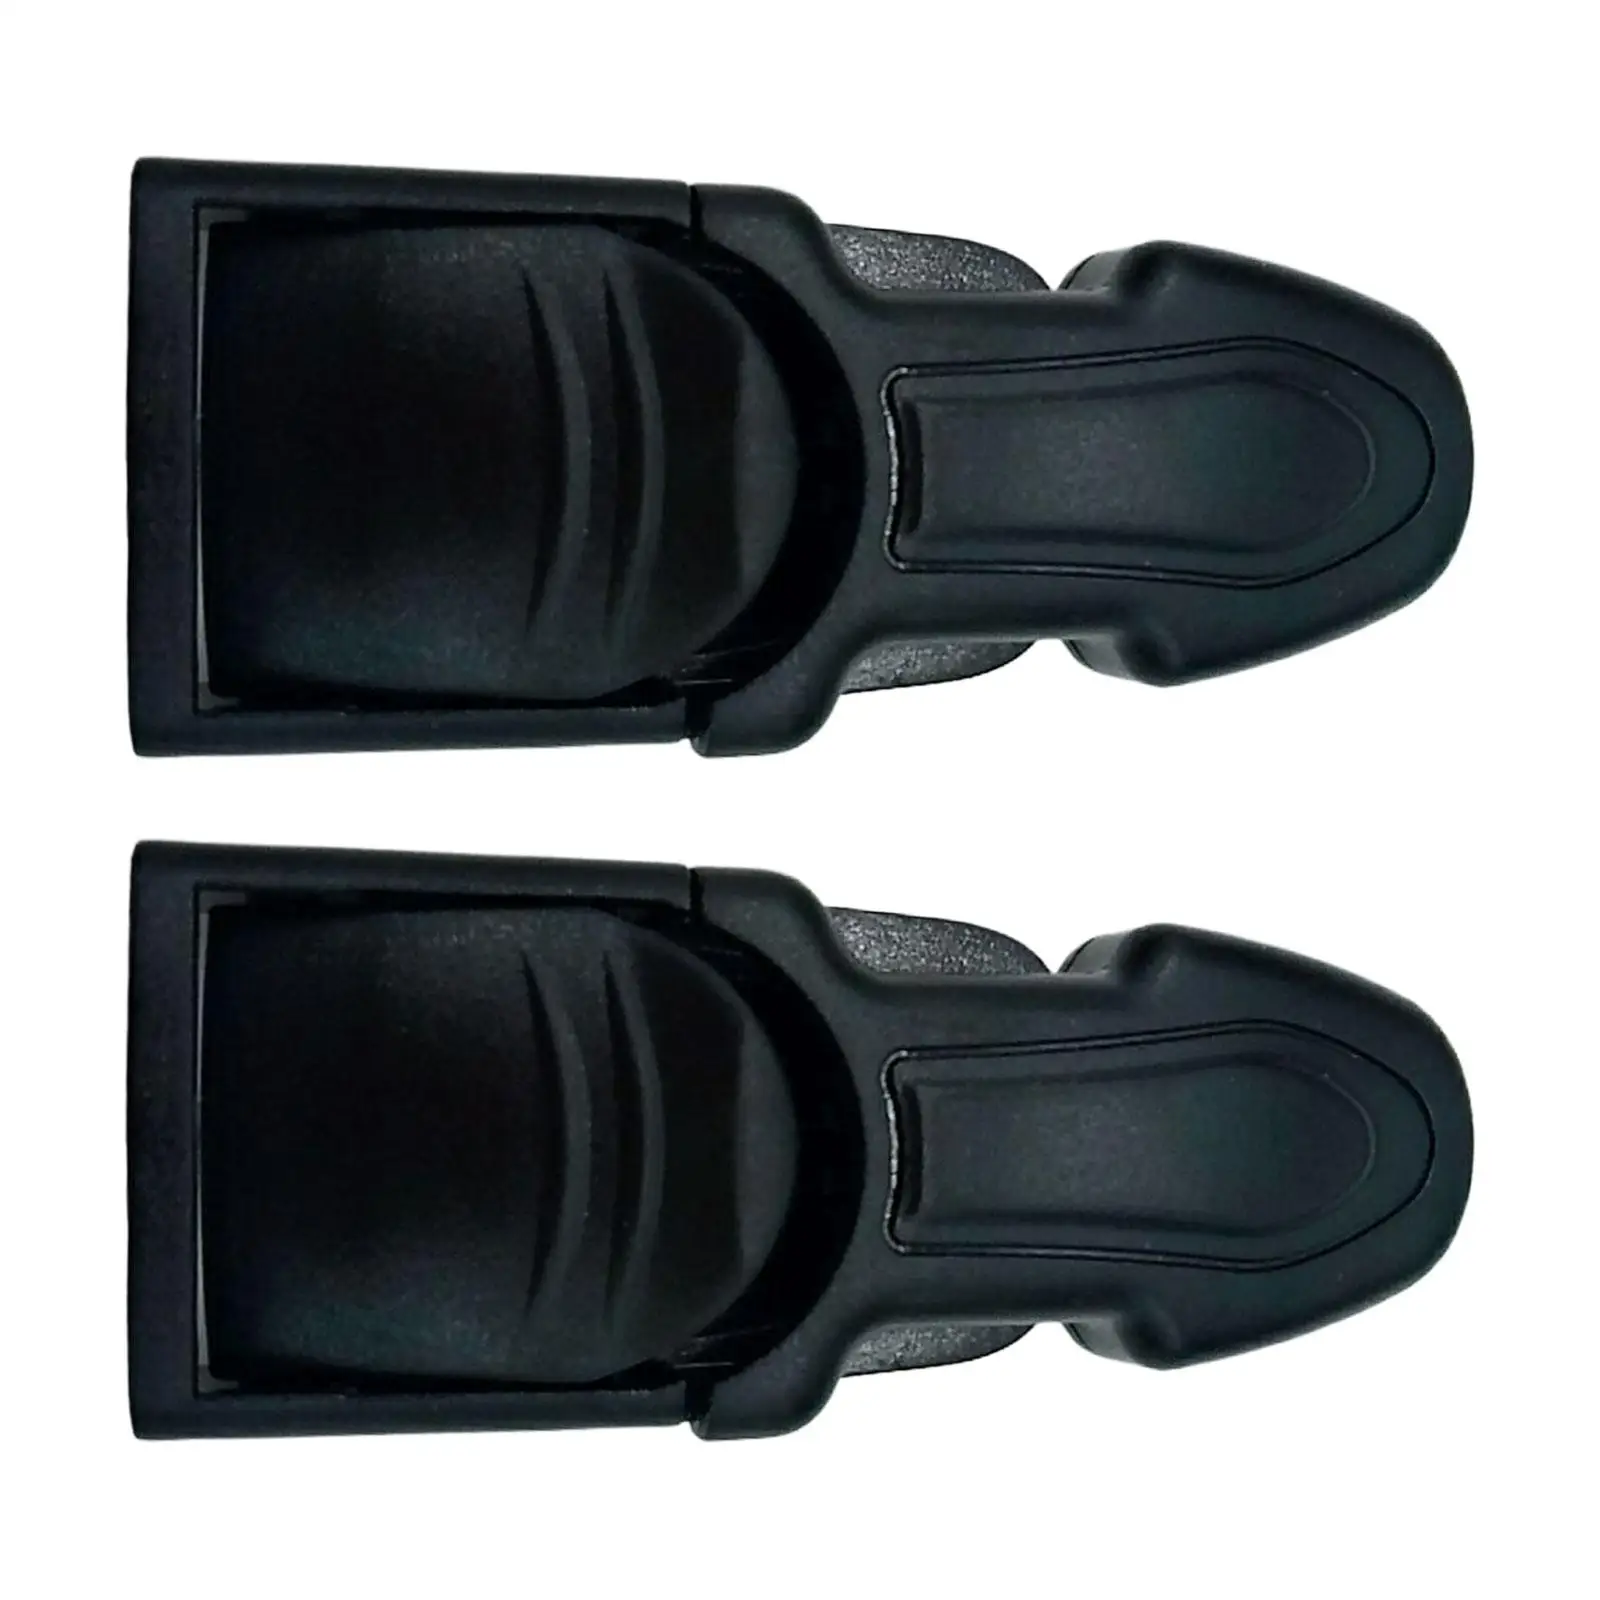 2Pcs Scuba Diving Fin Strap Quick Release Buckles Replacement Foot Flippers Adjustable Accessories